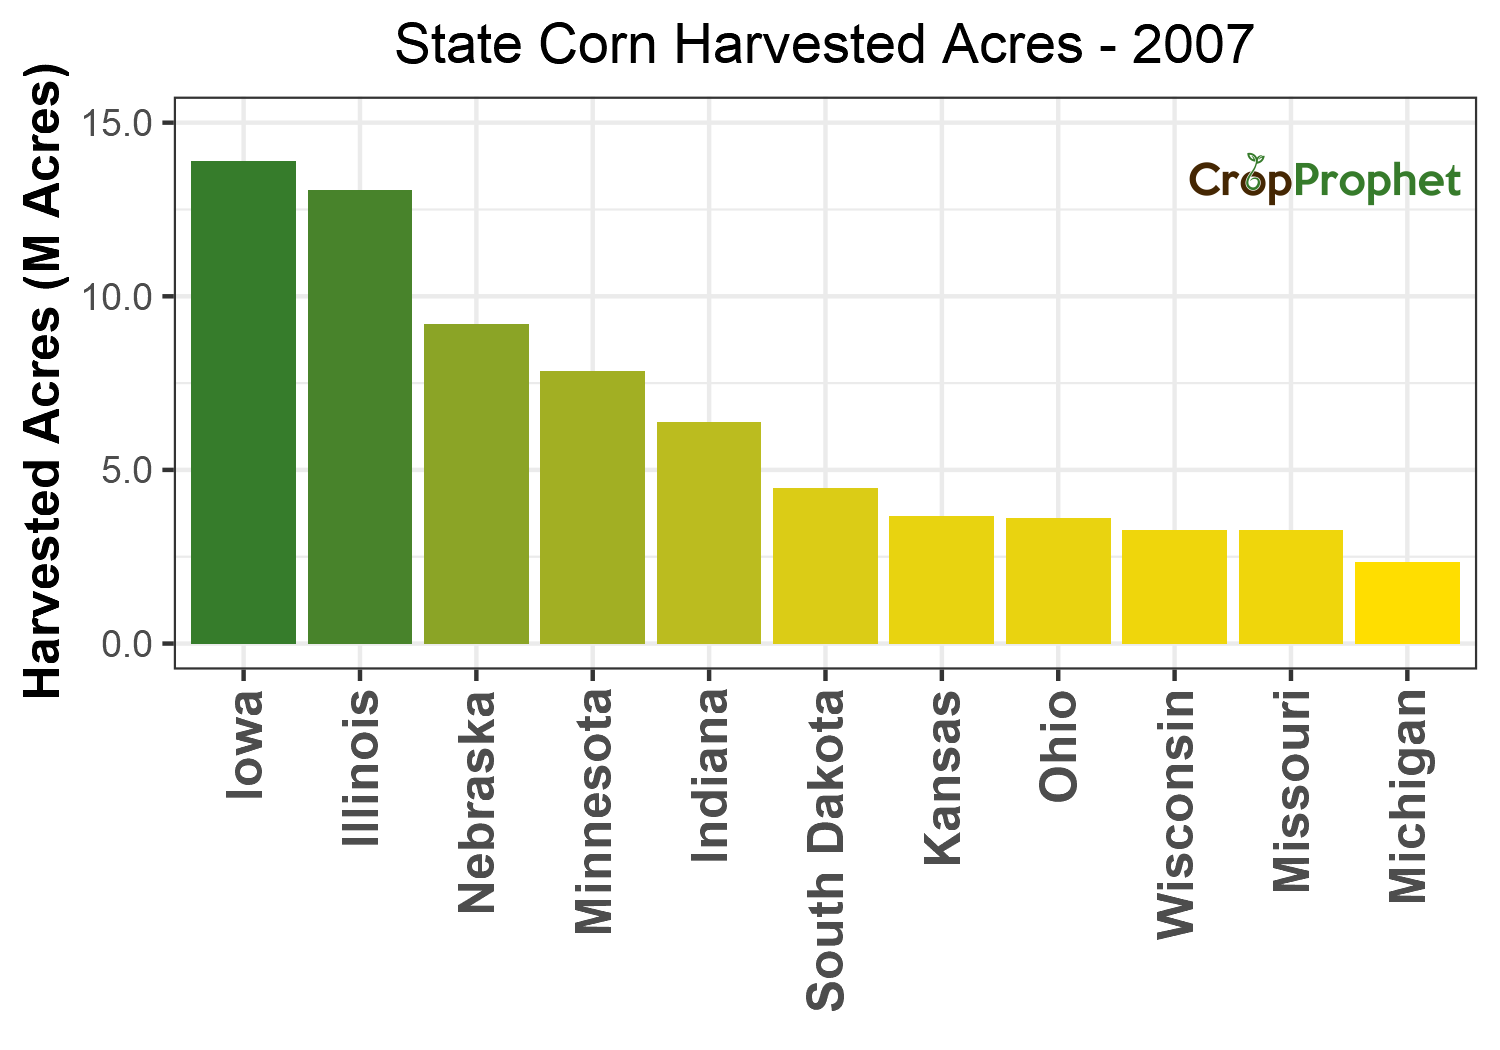 Corn Harvested Acres by State - 2007 Rankings